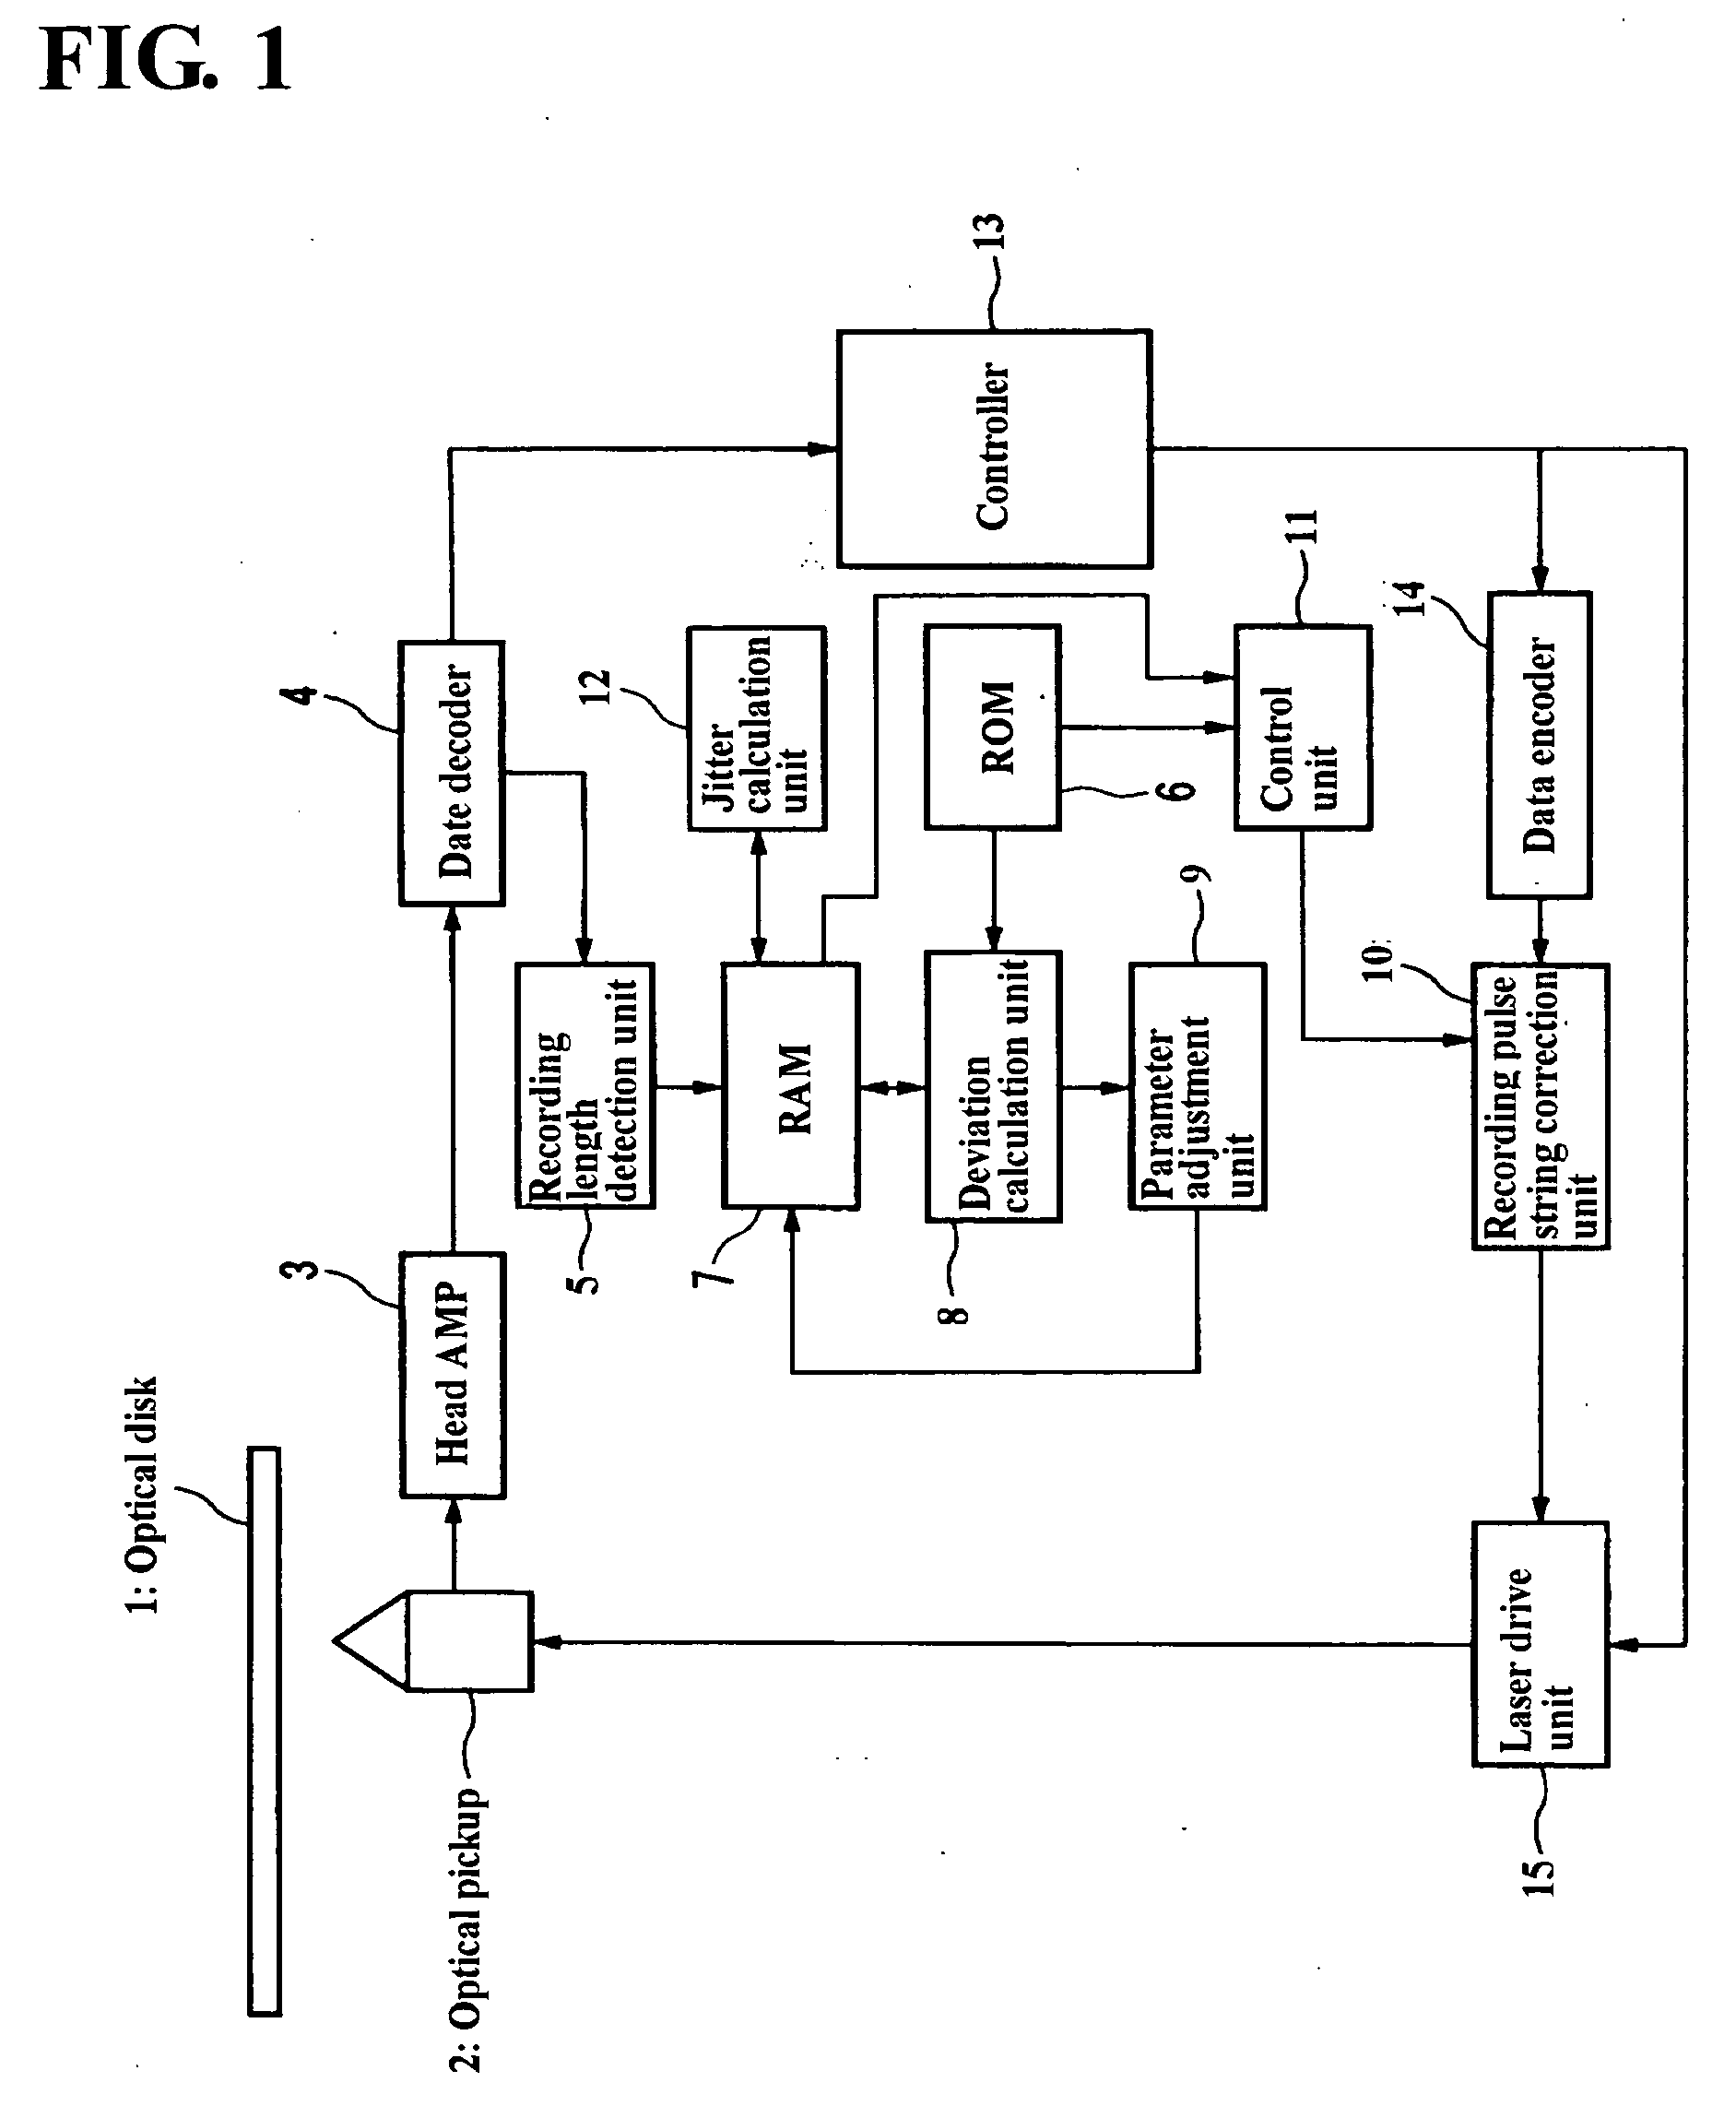 Optical disk device and program for recording and reproducing information on and from an optical recording medium